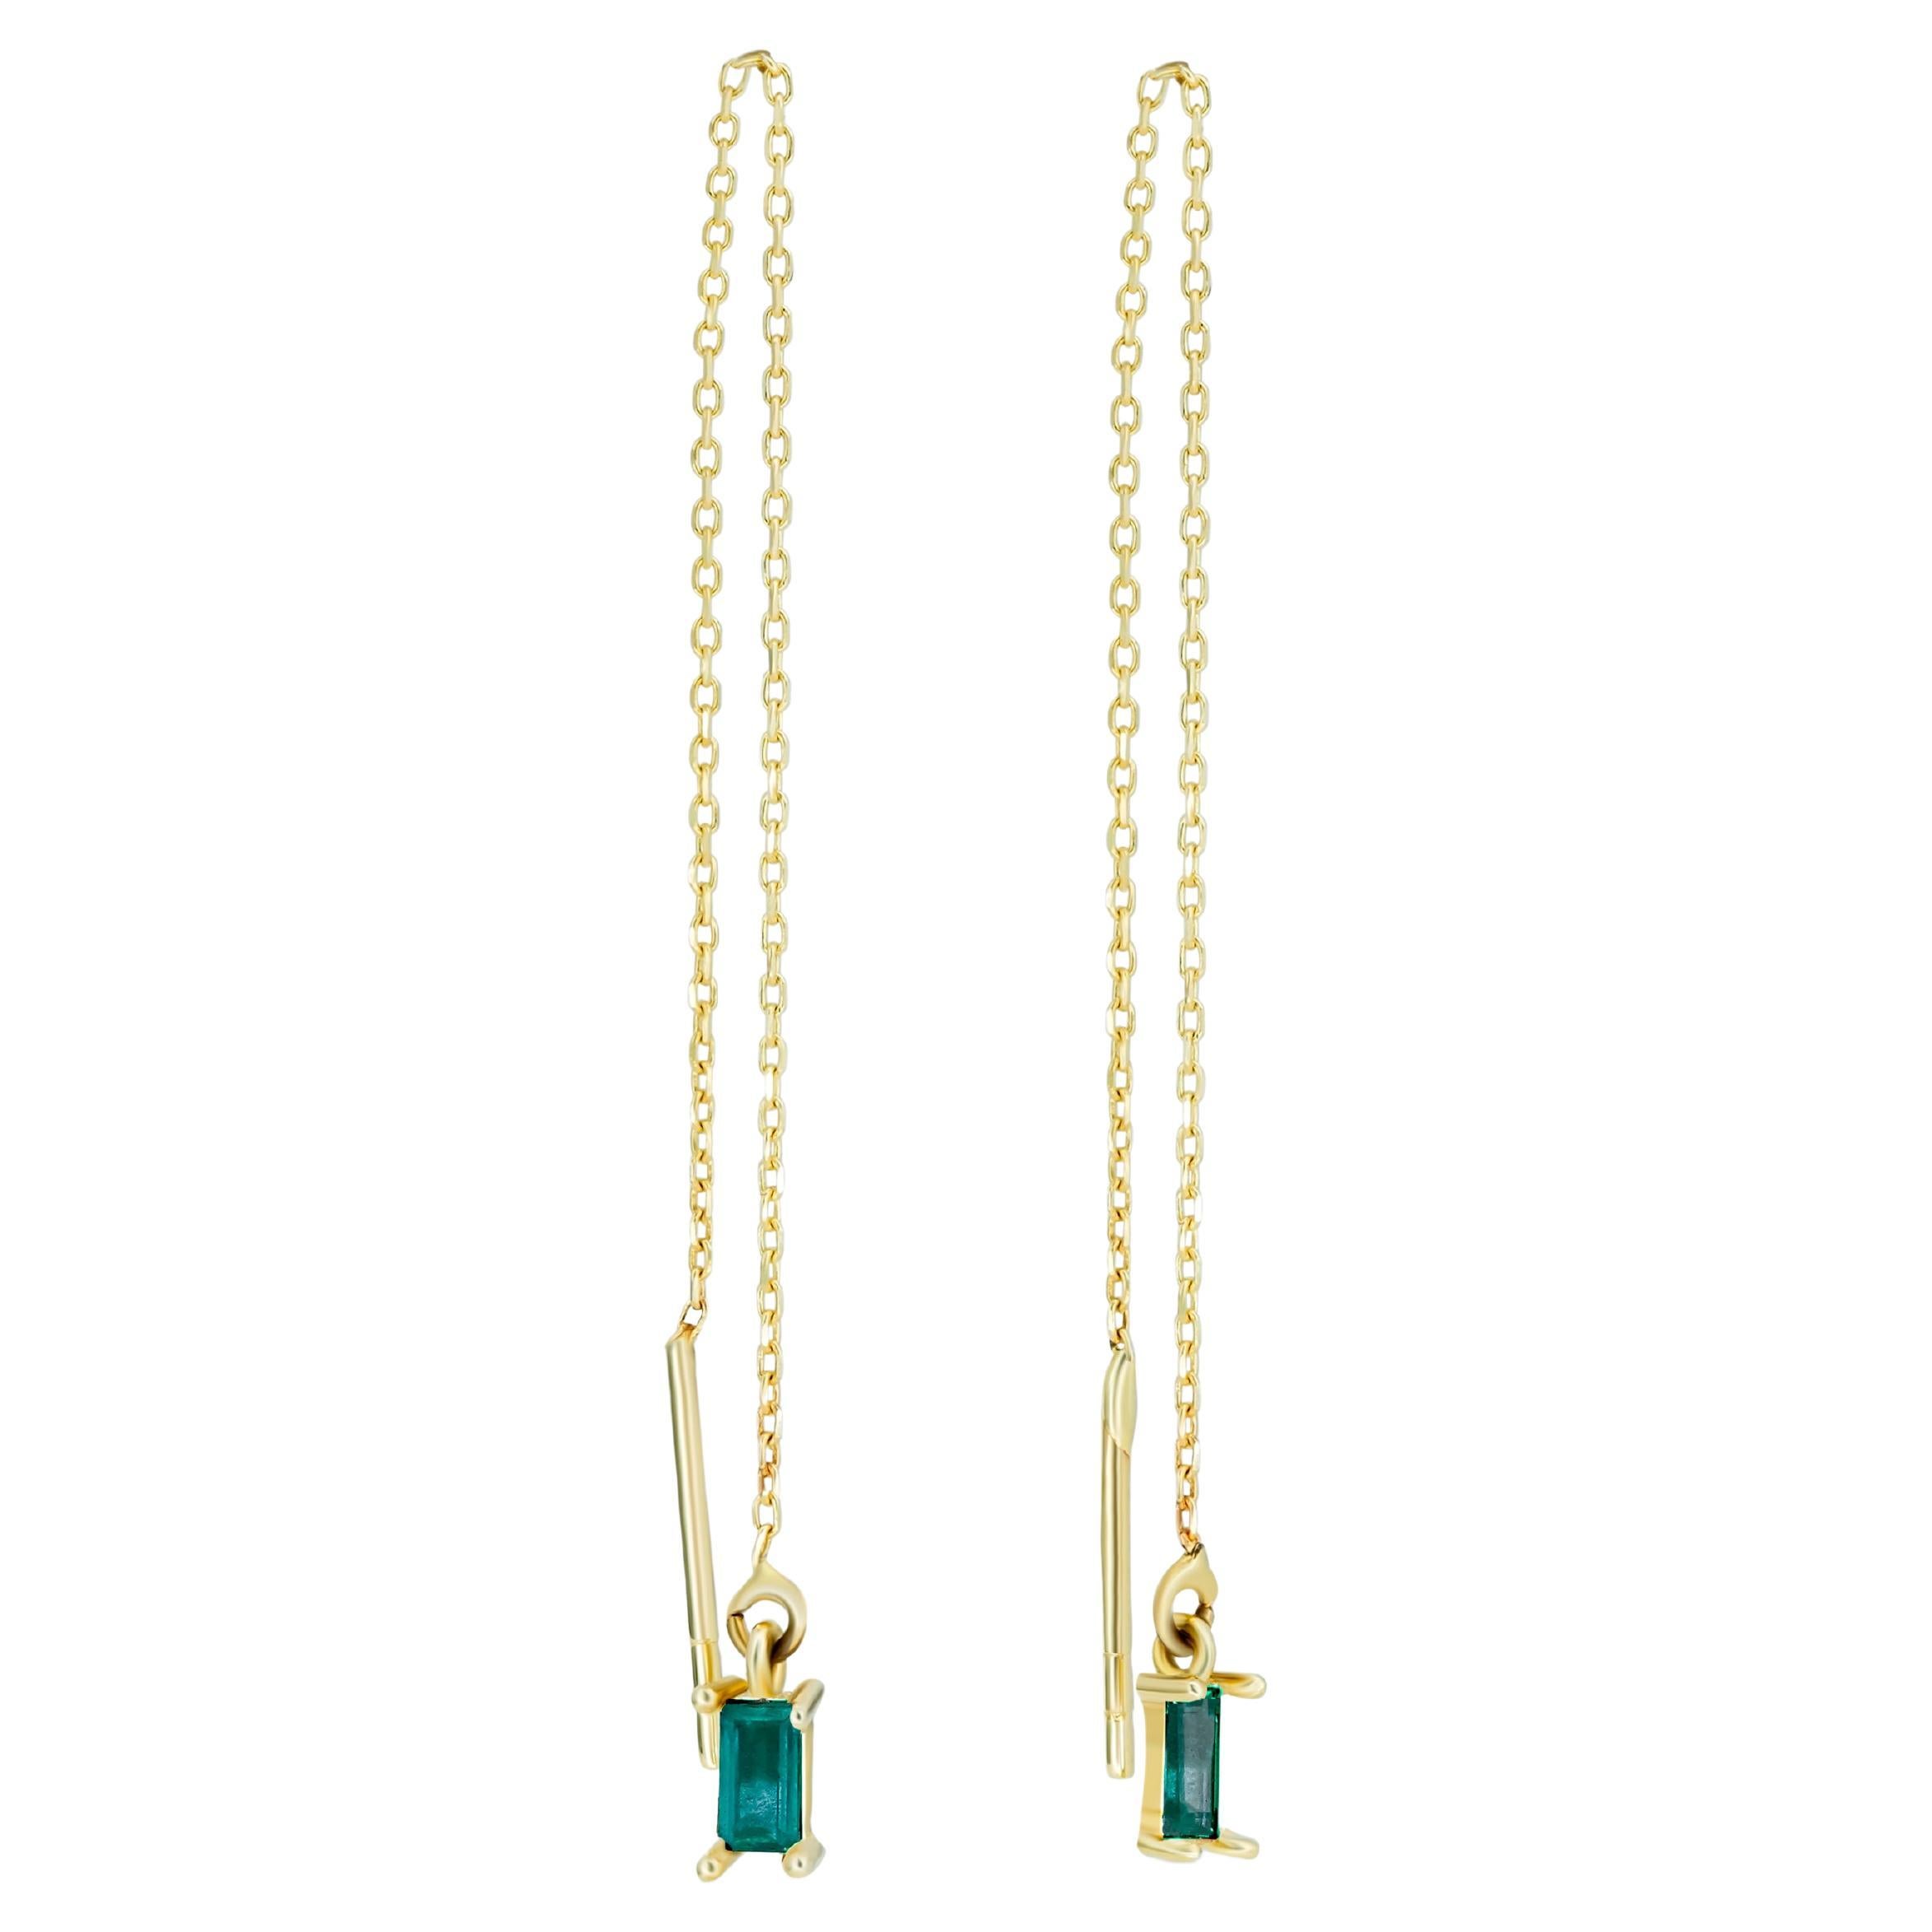 Baguette Cut 14k Solid Gold Drop Earrings with Emeralds, Chain Gold Earrings For Sale